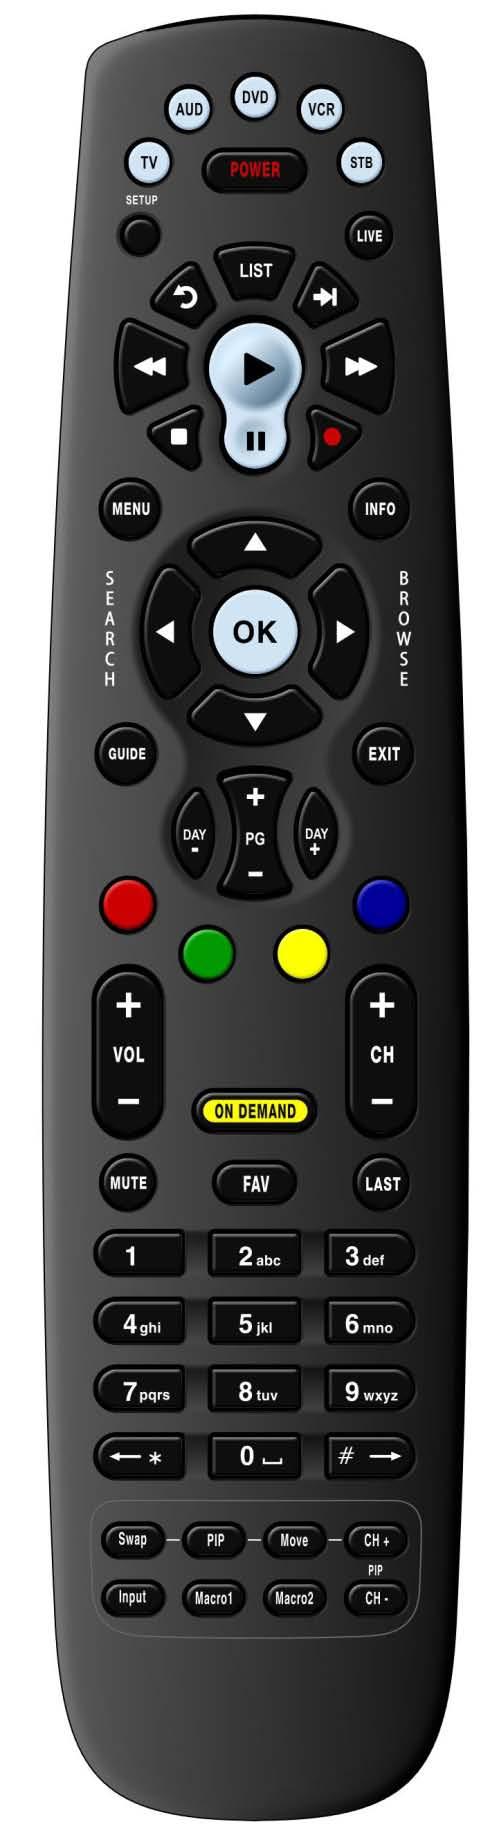 IPTV Middleware Remote Control & DVR User Guide Version 4.0 The information presented in this document is written for the default settings of the system.